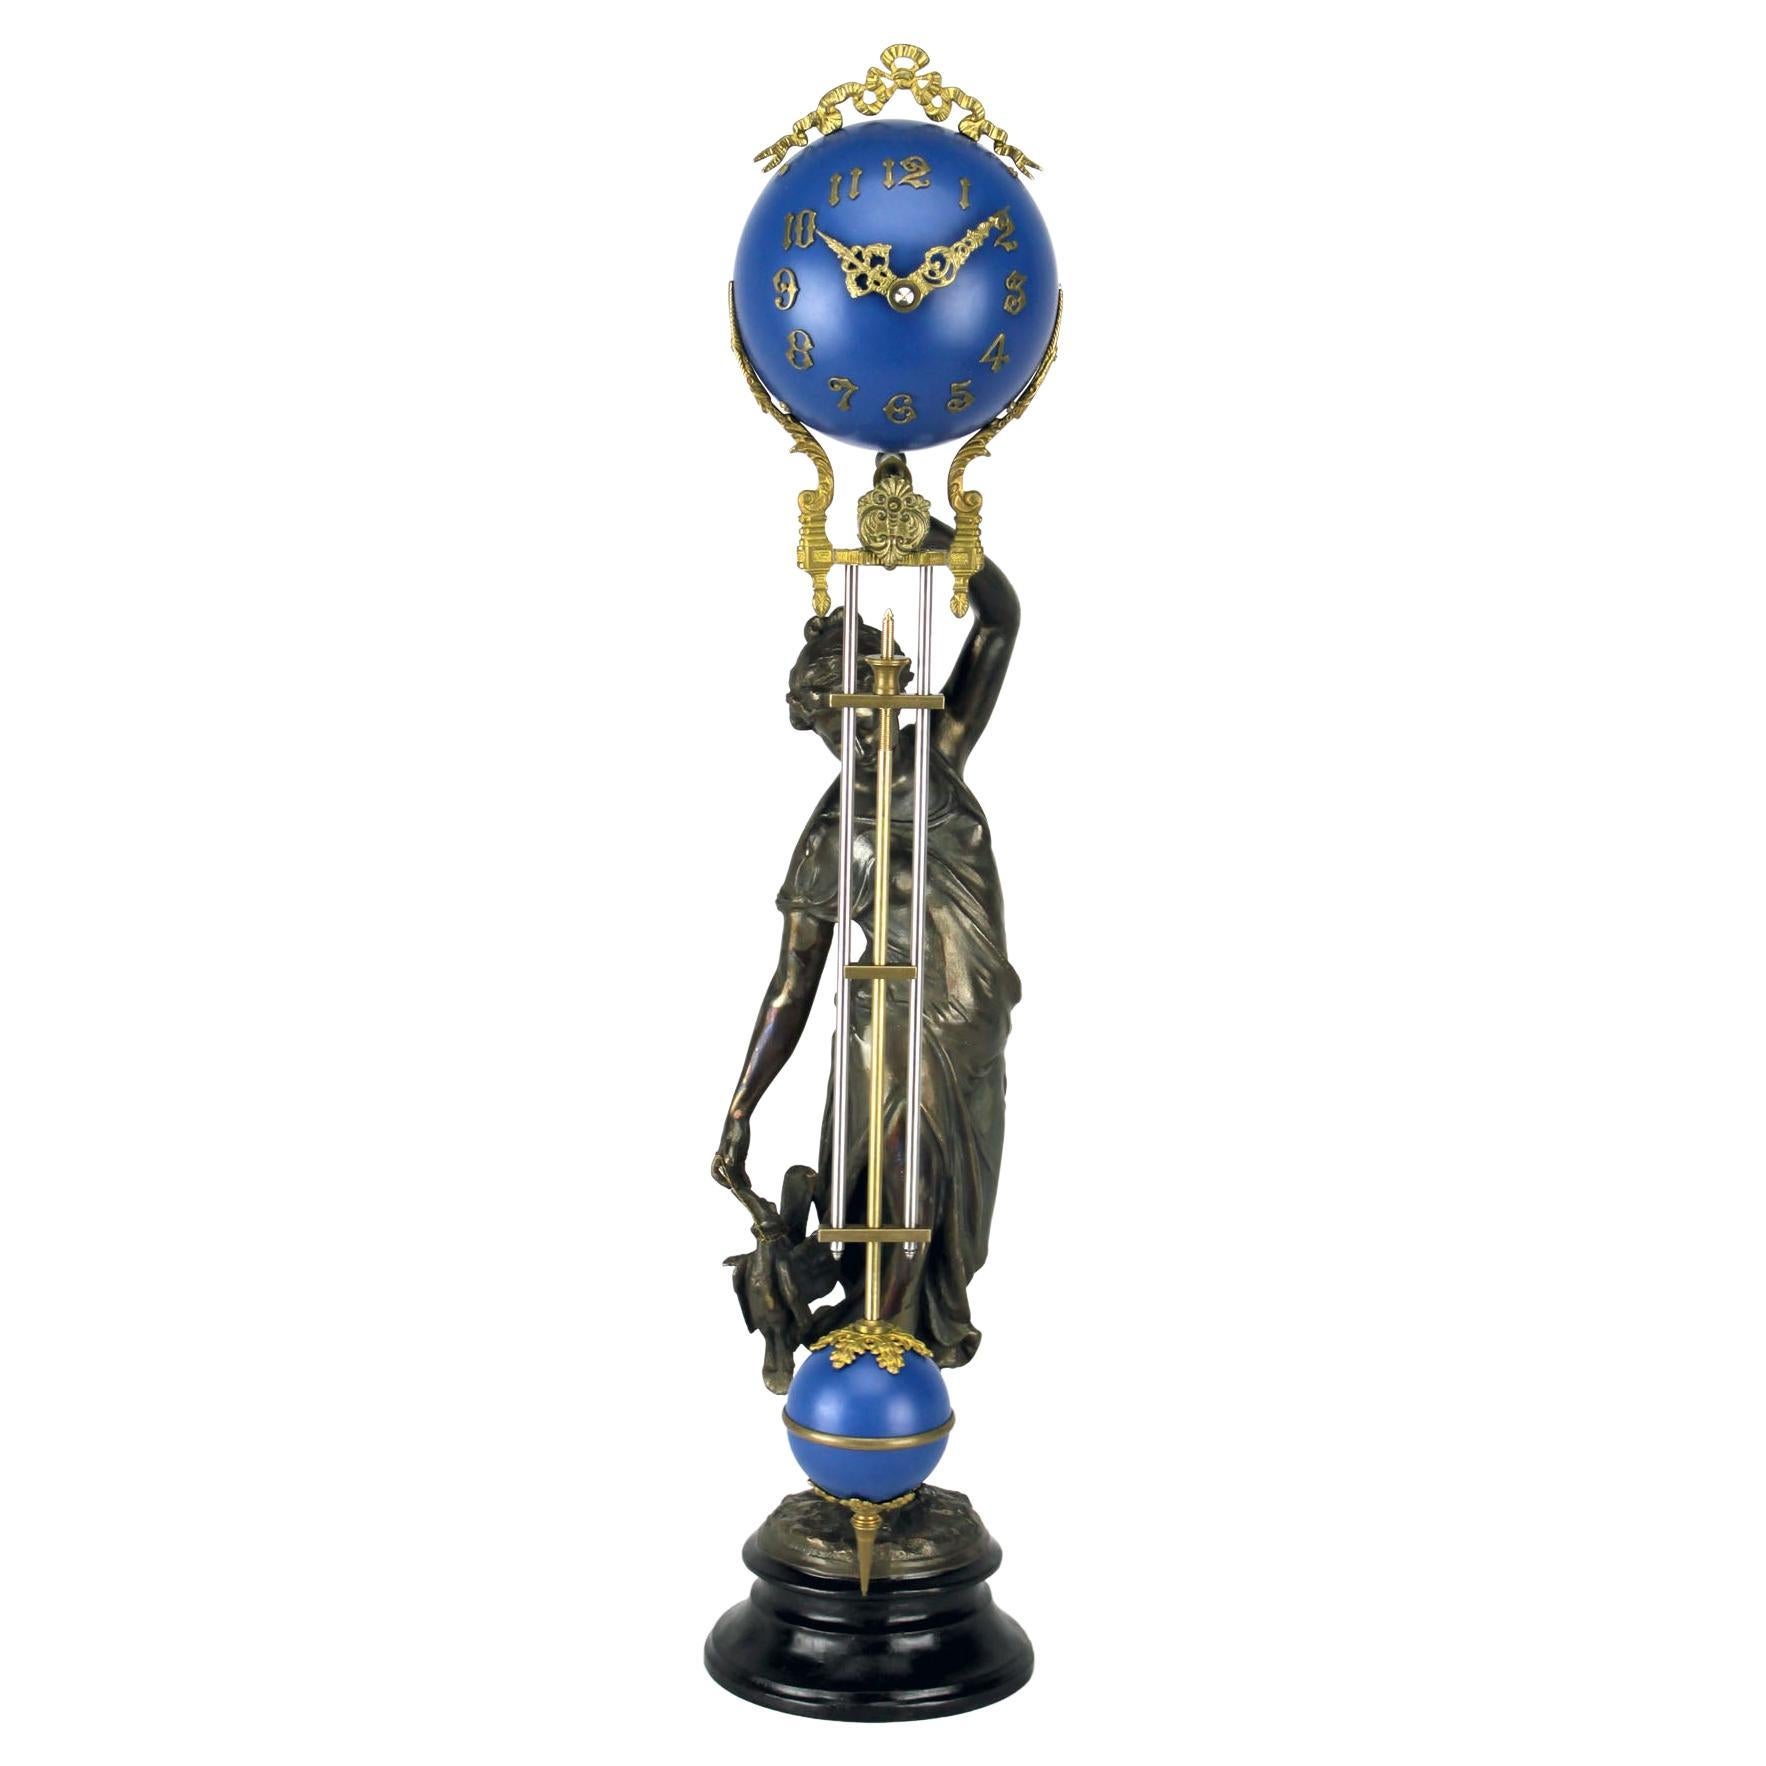 Mystery Cobalt Blue Ball 8 Day Brass Huntress Lady Statue Swinging Clock For Sale